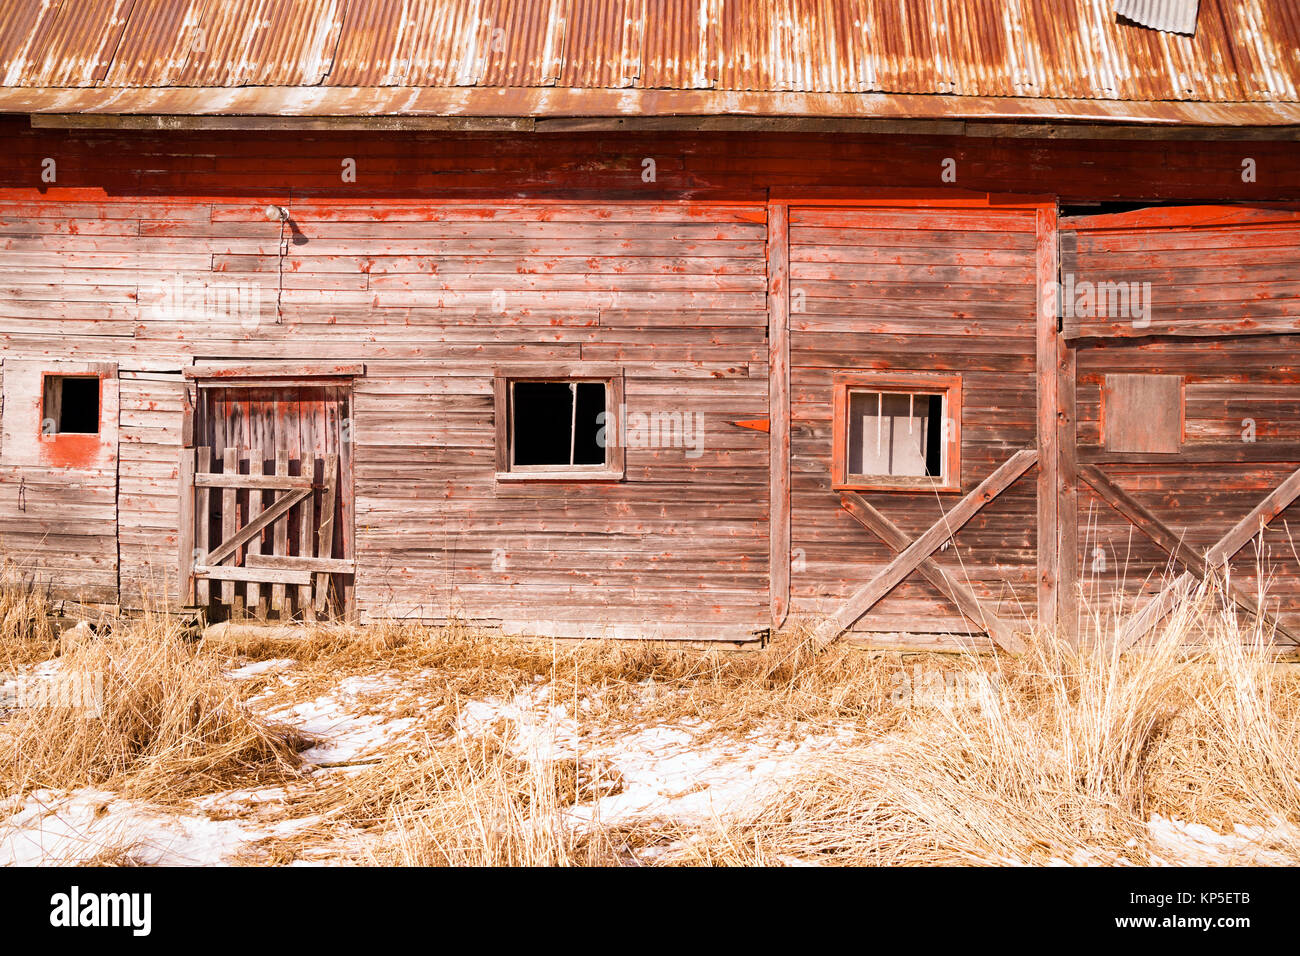 Abandoned Derelict Farm Barn Cold Winter North Country Stock Photo